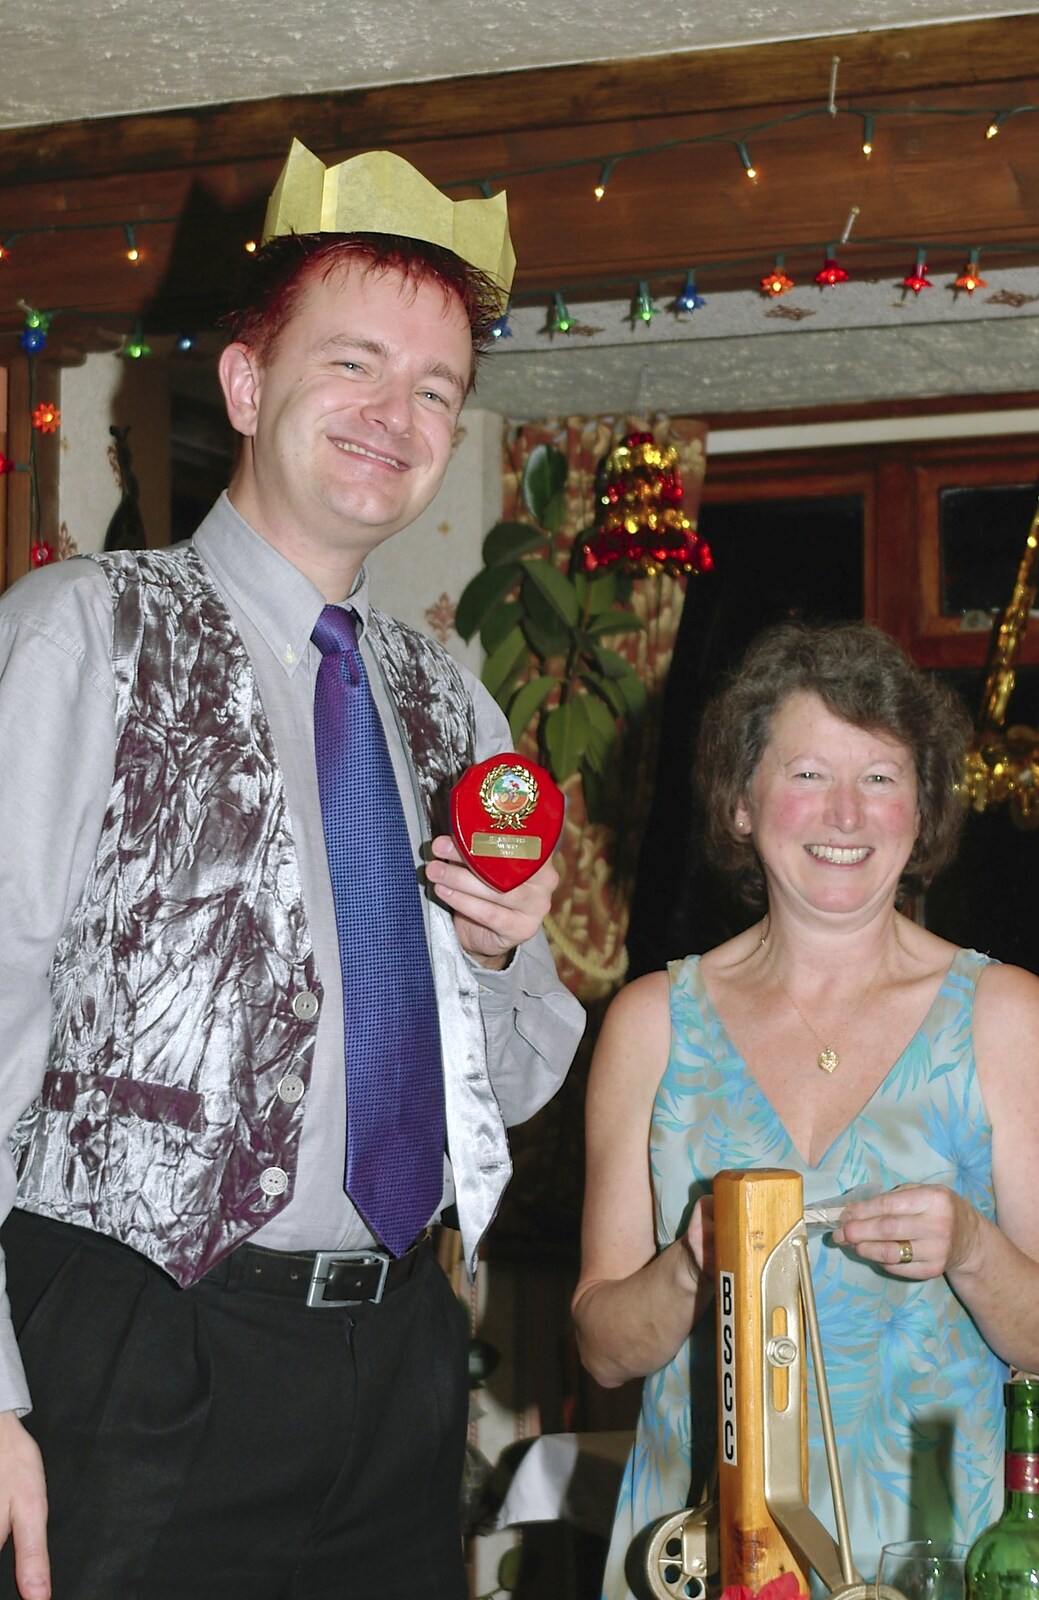 The BSCC Annual Dinner, The Brome Swan, Suffolk - 4th December 2004: Nosher gets an award as Crap-tain of the club